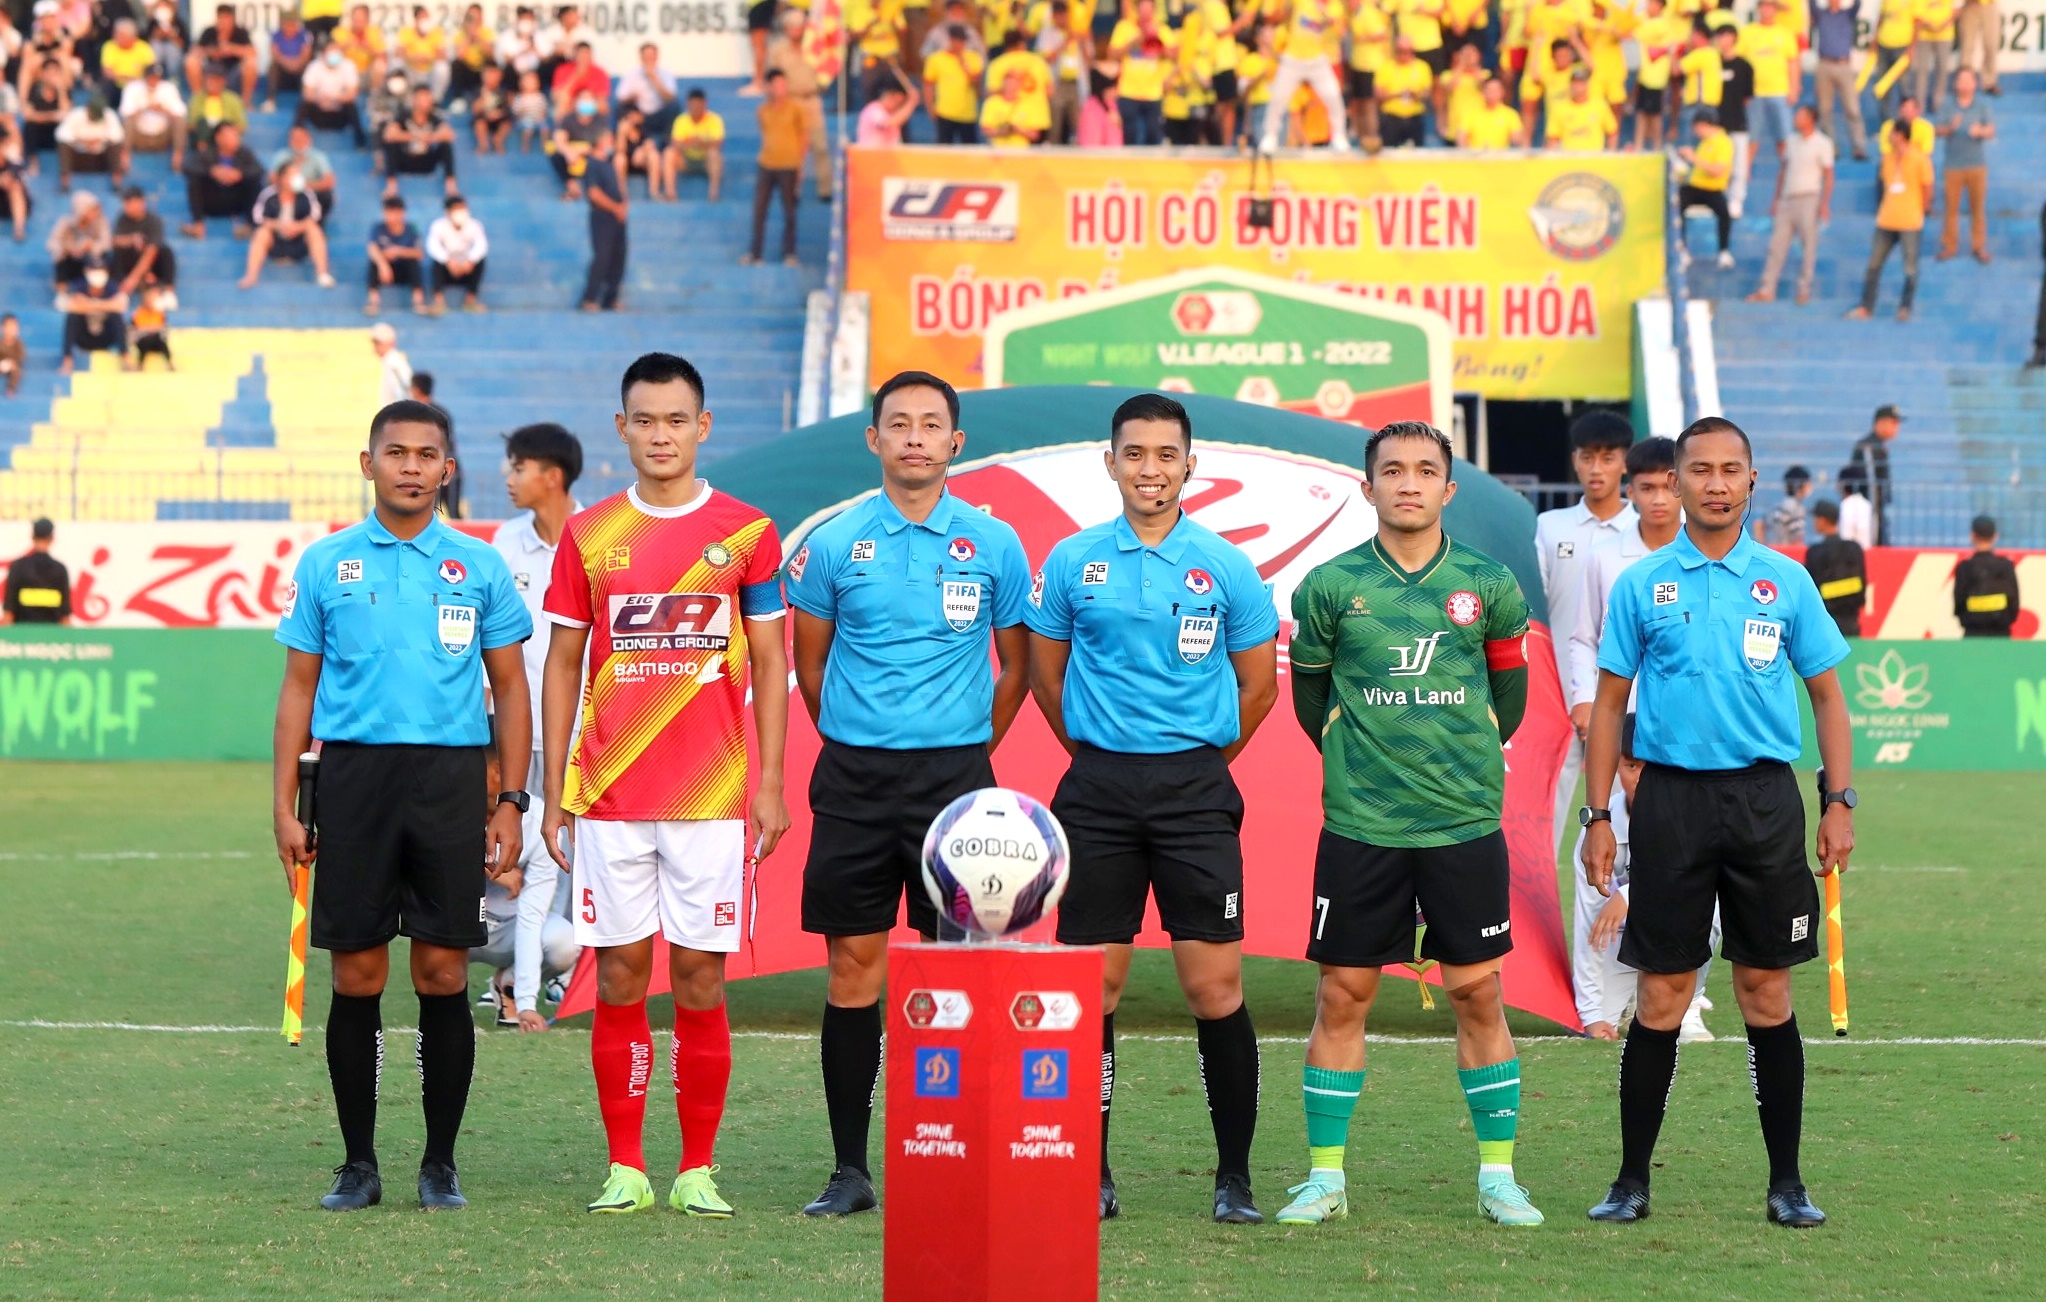 Vietnam to use foreign referees at pro football league after domestic official’s poor decision